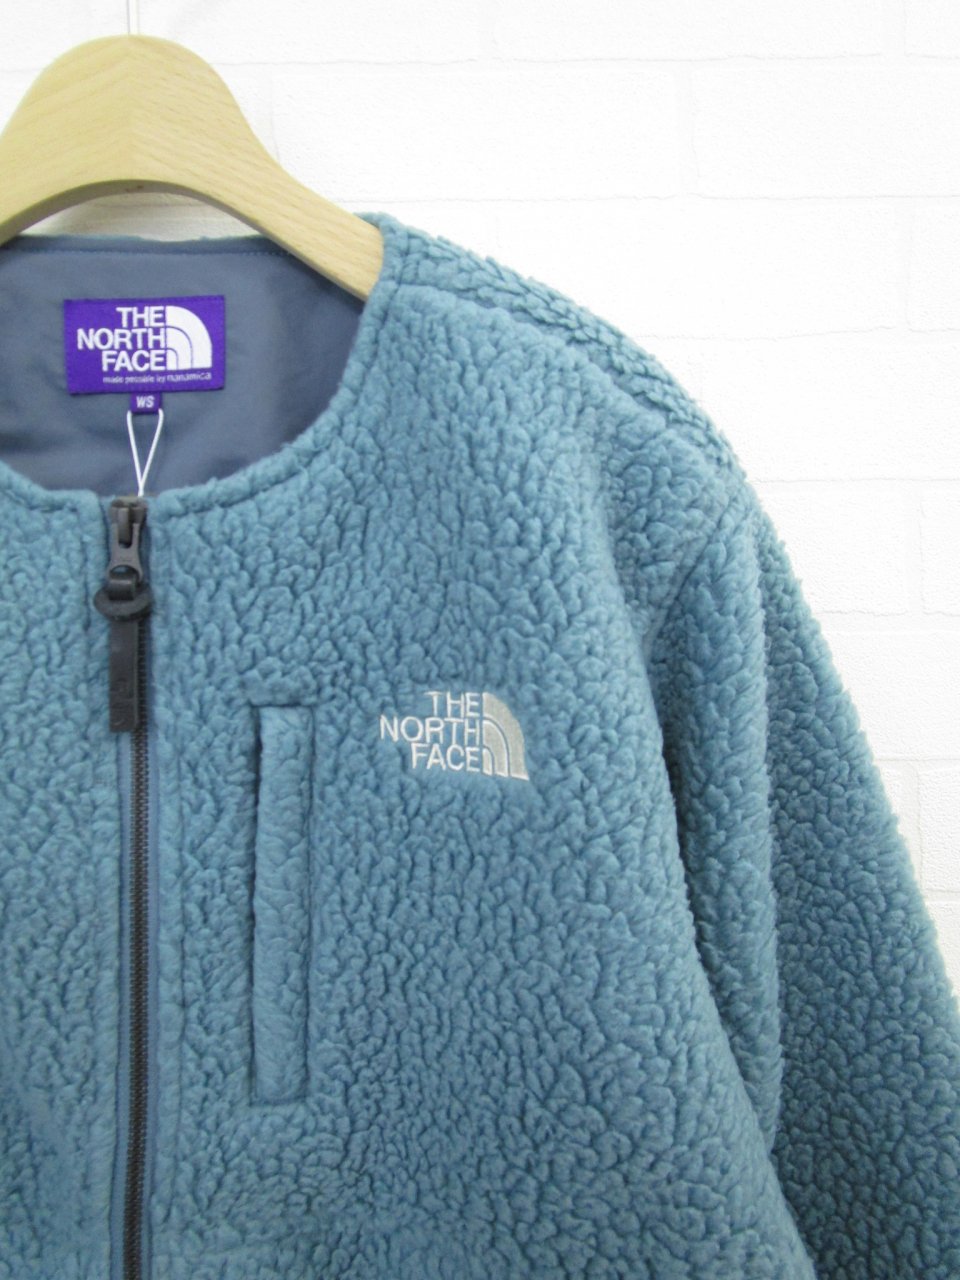 THE NORTH FACE - フィールドデナリコート - Sheth Online Store ...